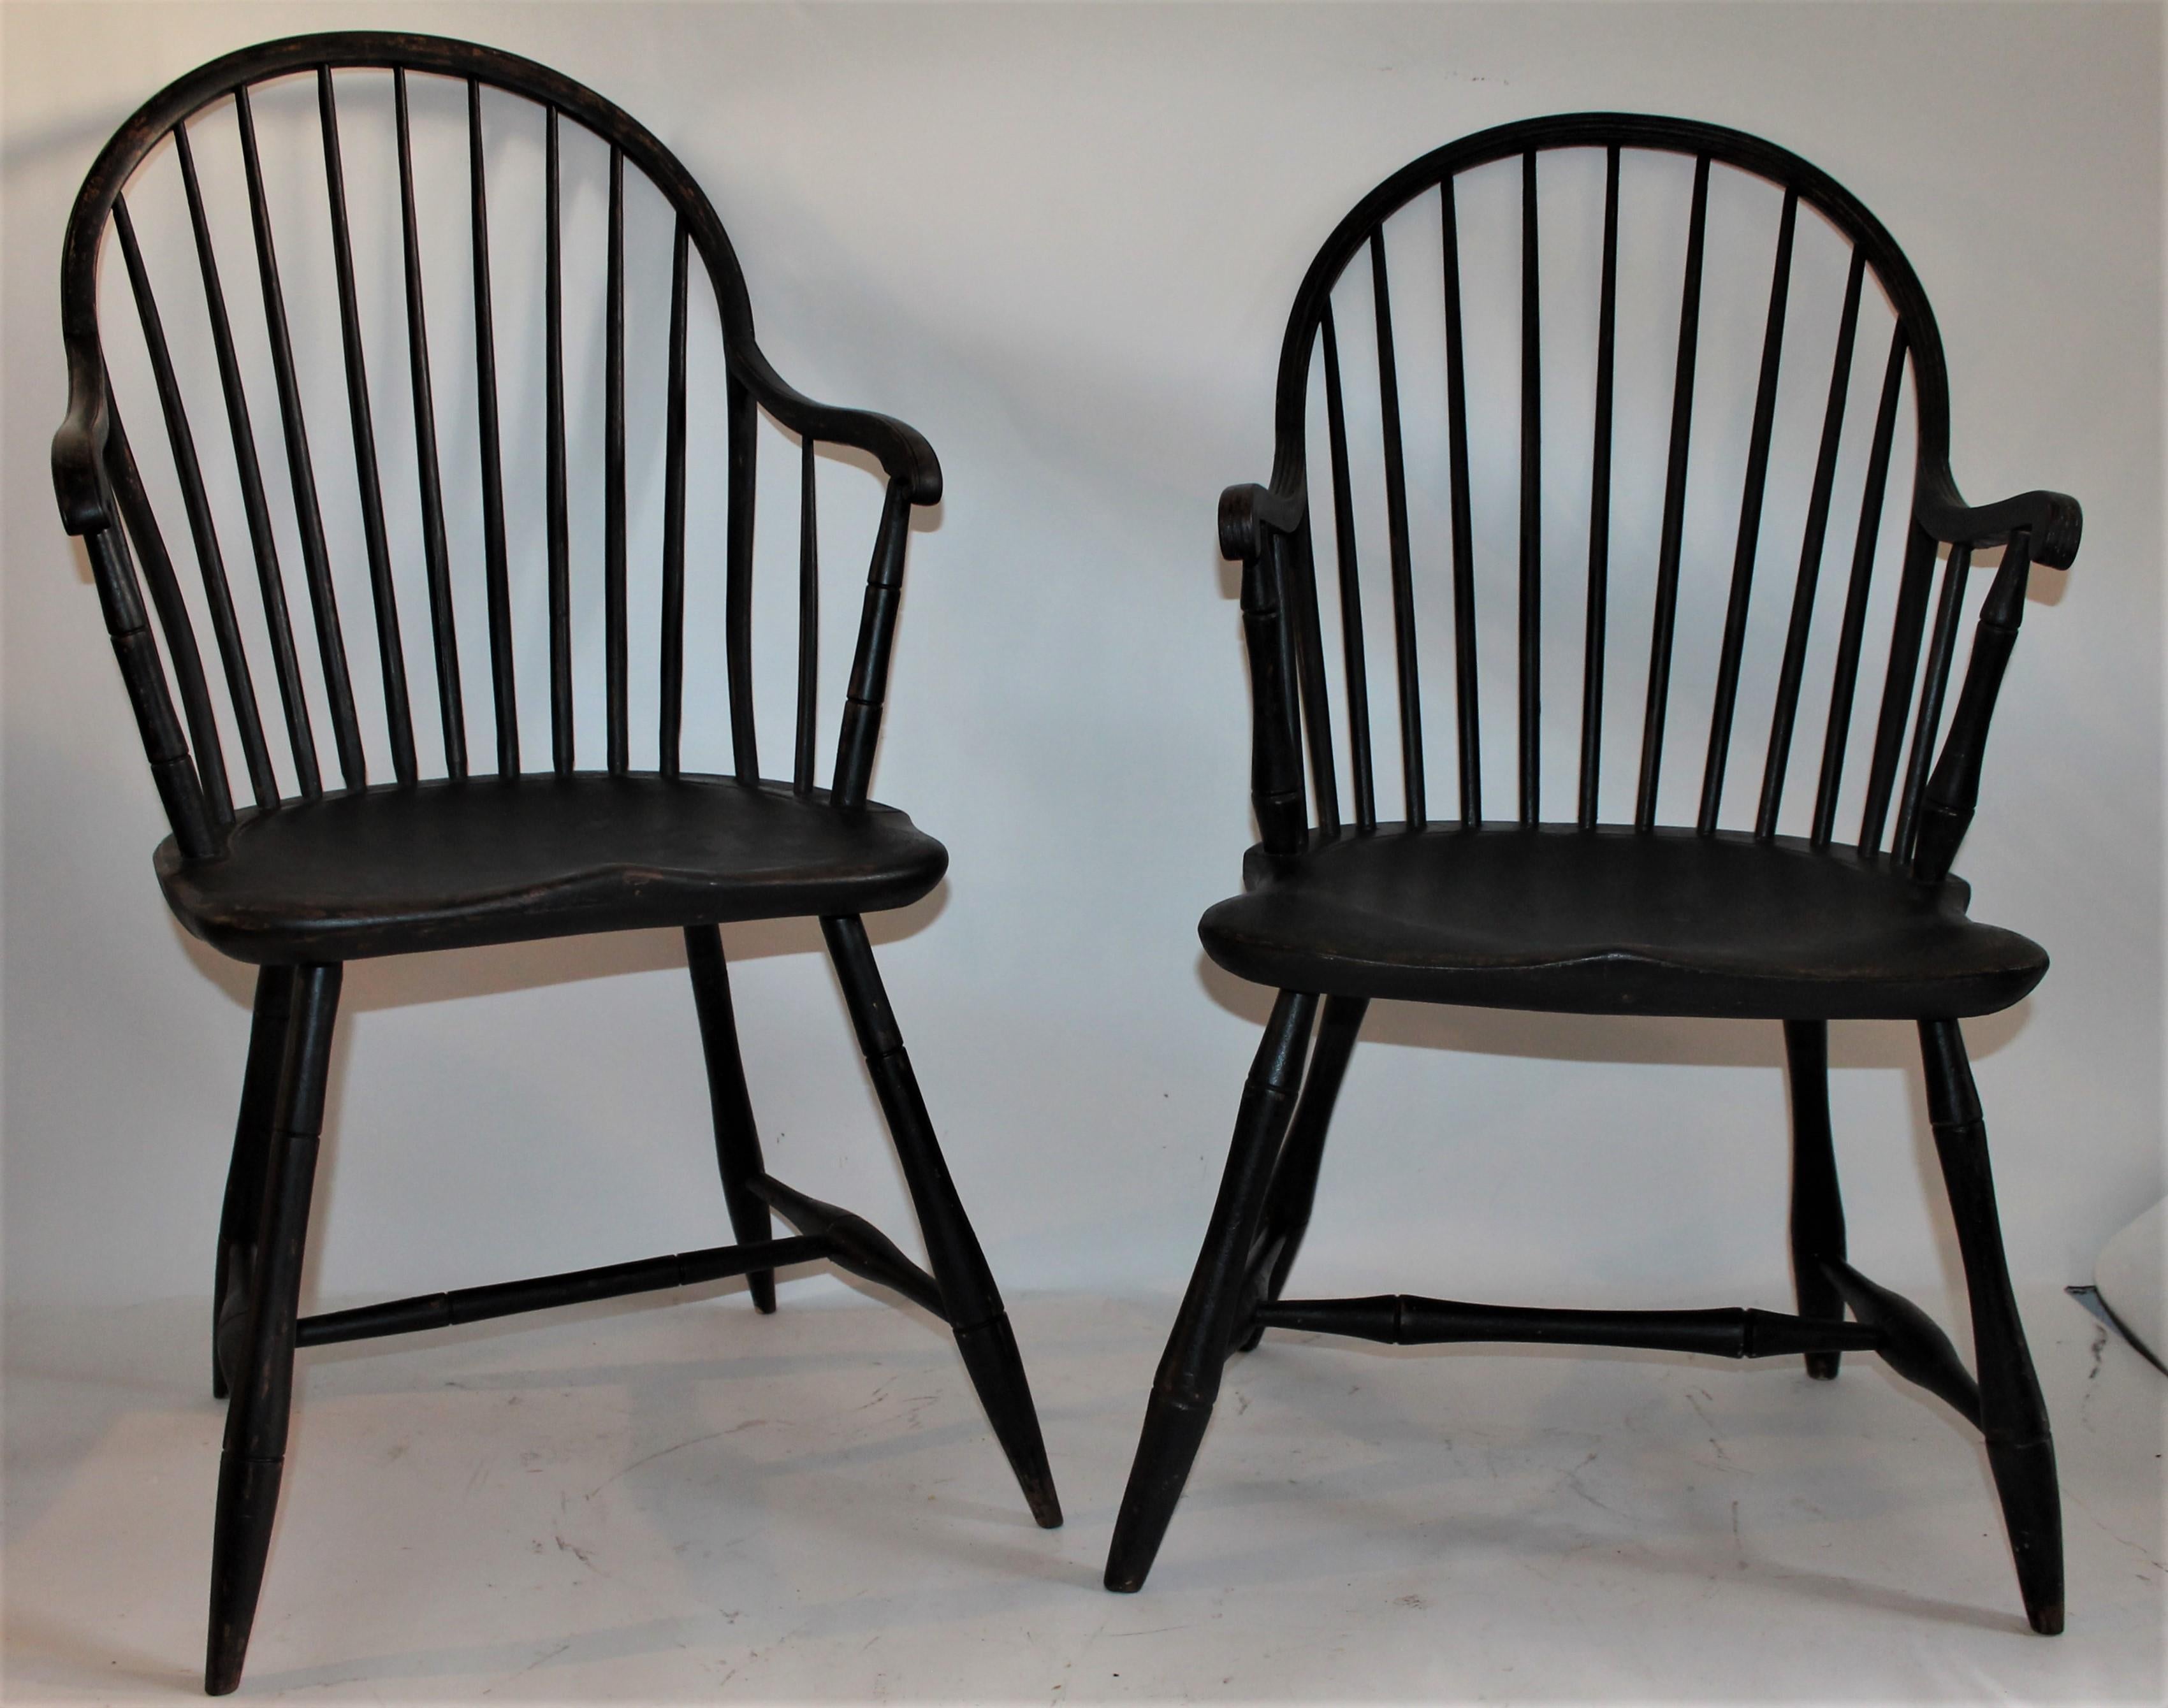 Early 19th century black painted Windsor armchairs in fantastic condition. They are not an exact match but very close. One has an antique repaired seat and the other does not. Note the curved arms on both New England chairs.